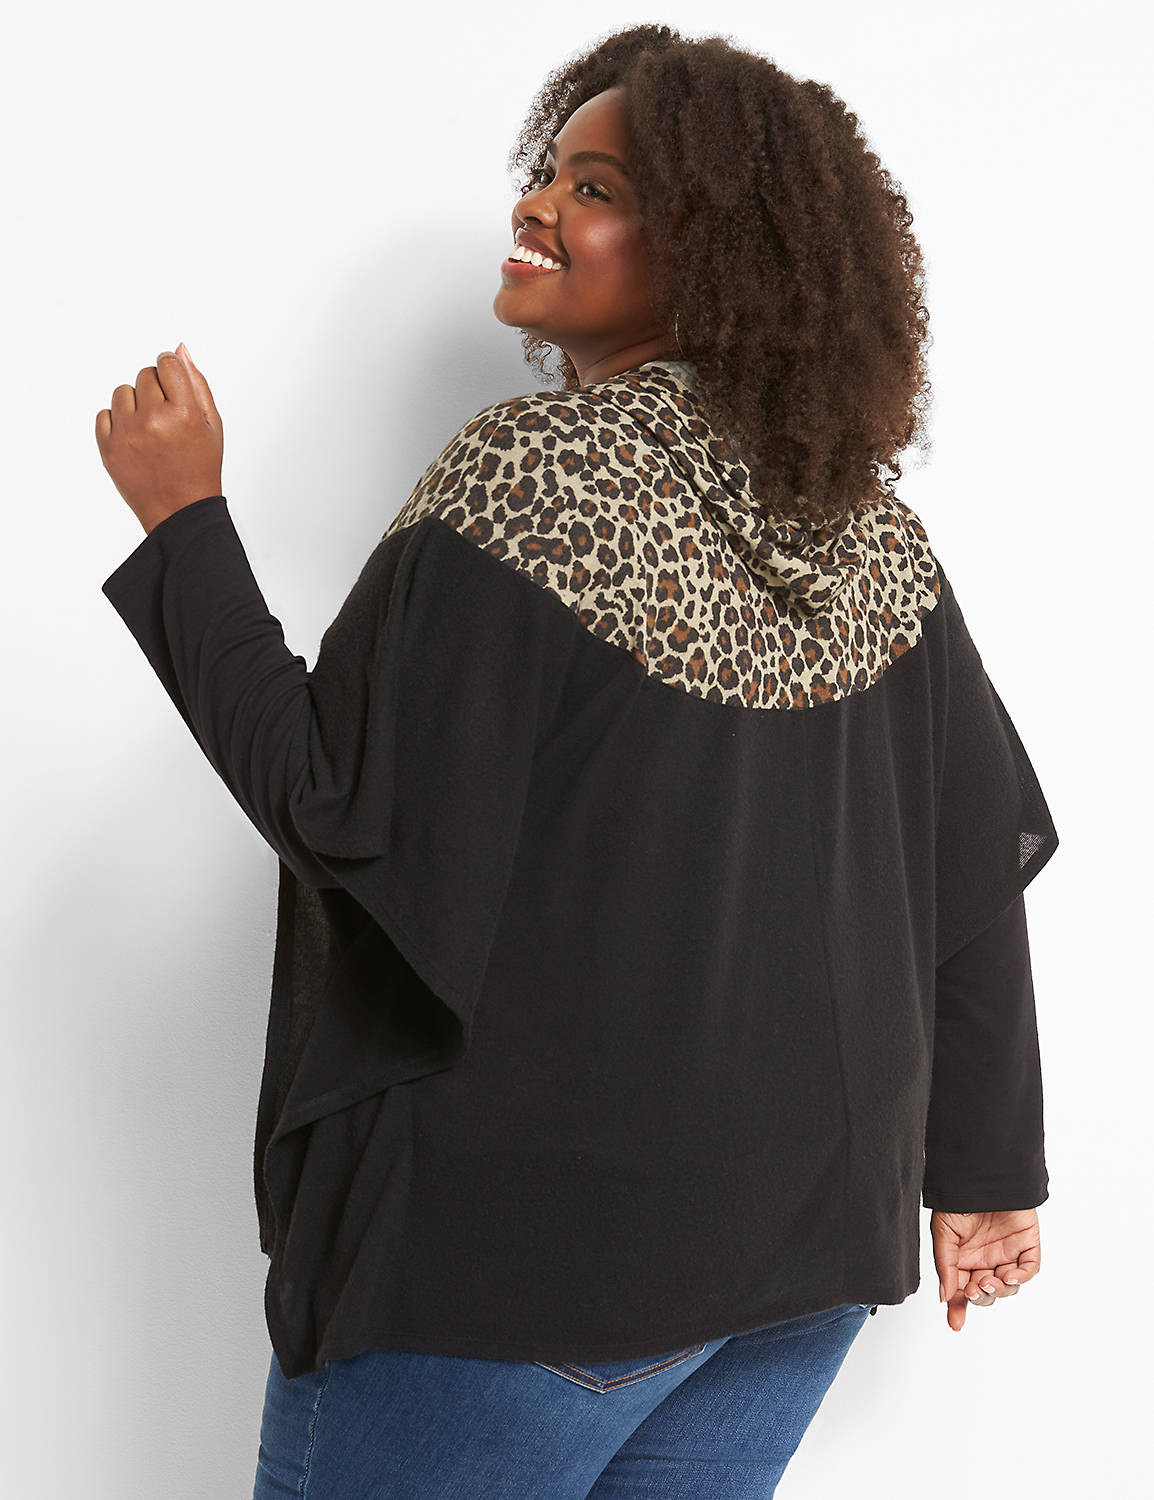 Poncho Hoodie With Leopard Mix 1124581:Ascena Black:10/12 Product Image 2